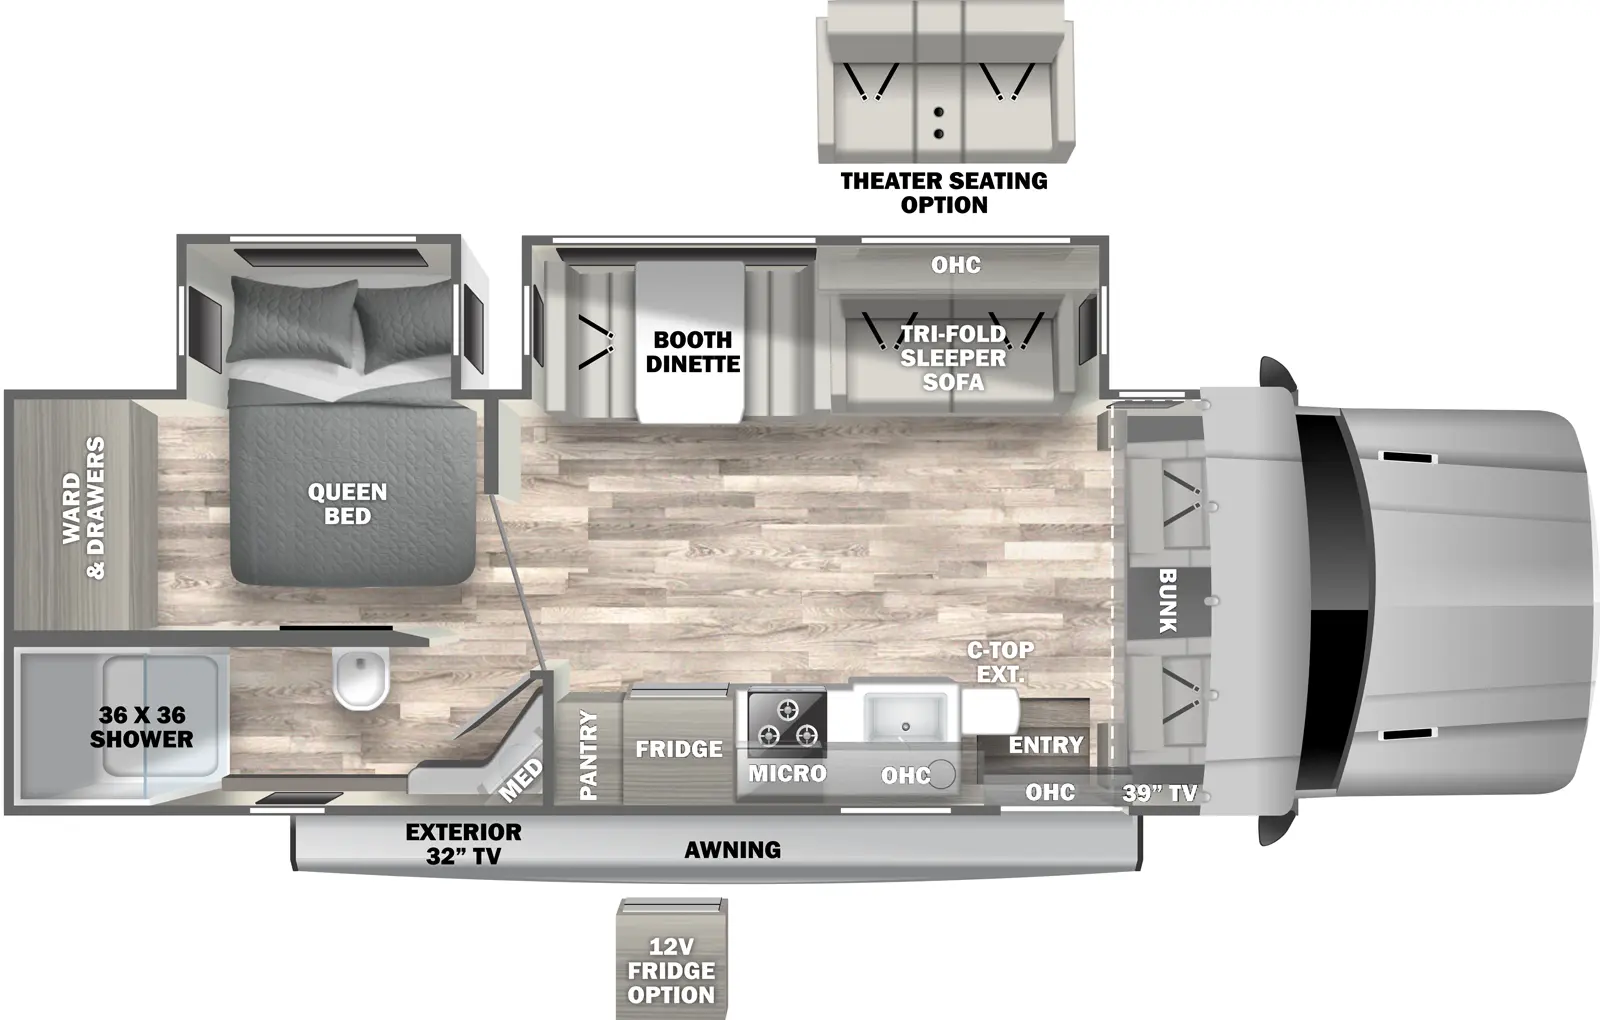 The 30FW has two slideouts and one entry. Exterior features an outside TV and awning. Interior layout front to back: bunk over front cab and door-side TV; off-door side slideout with tri-fold sleeper sofa (optional theater seating), overhead cabinet and booth dinette; door side entry with overhead cabinet, kitchen countertop with extension, sink, microwave, cooktop, refrigerator (optional 12 volt refrigerator) and pantry; rear off-door side queen bed slideout and rear wardrobe with drawers; rear door side full bathroom with medicine cabinet.